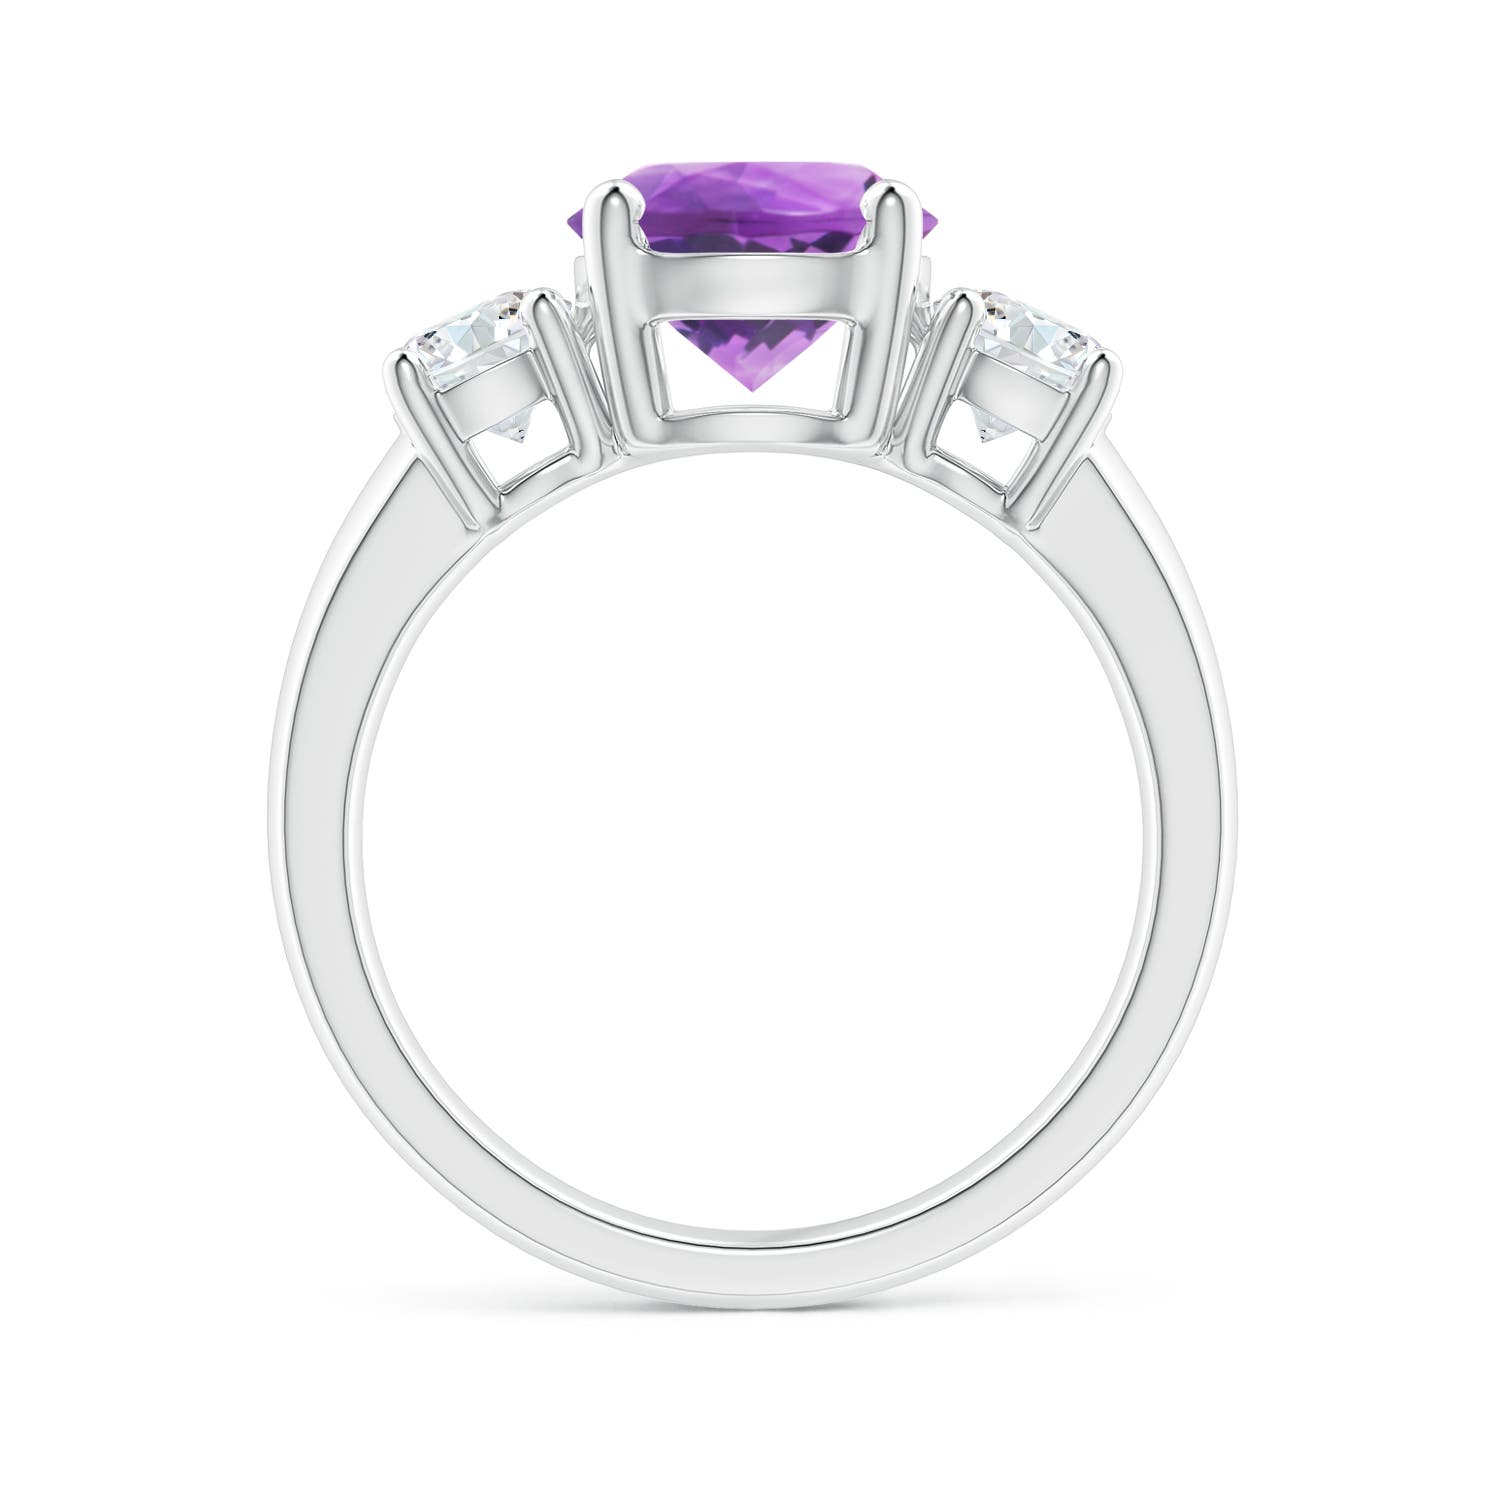 AA - Amethyst / 2.4 CT / 14 KT White Gold